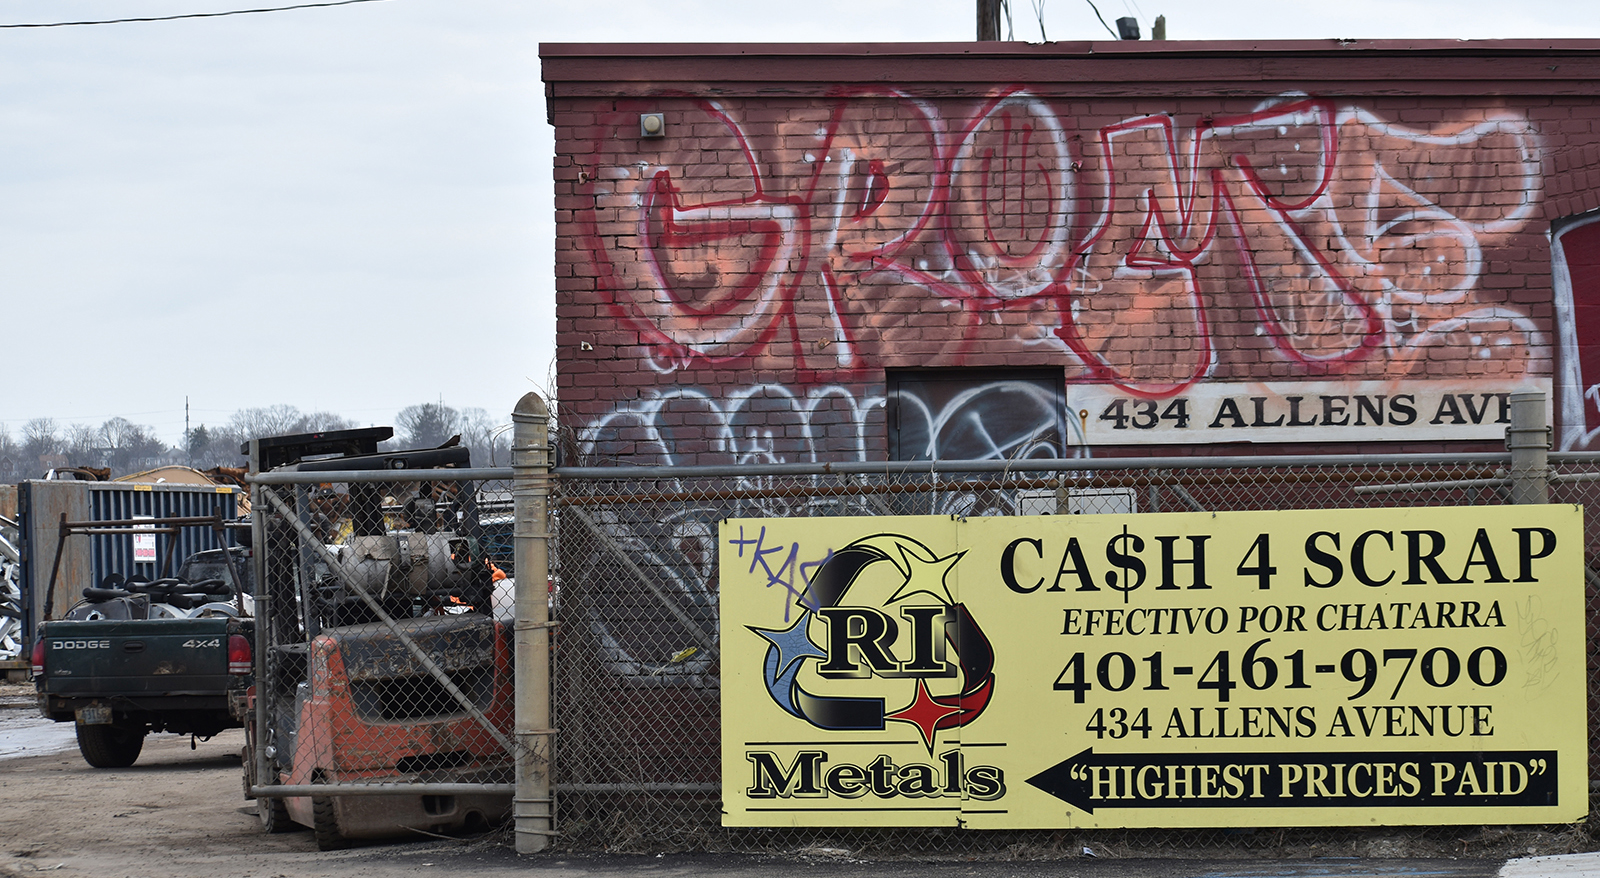 Rhode Island Recycled Metals has been operating illegally along the Providence waterfront since 2009. (Frank Carini/ecoRI News)